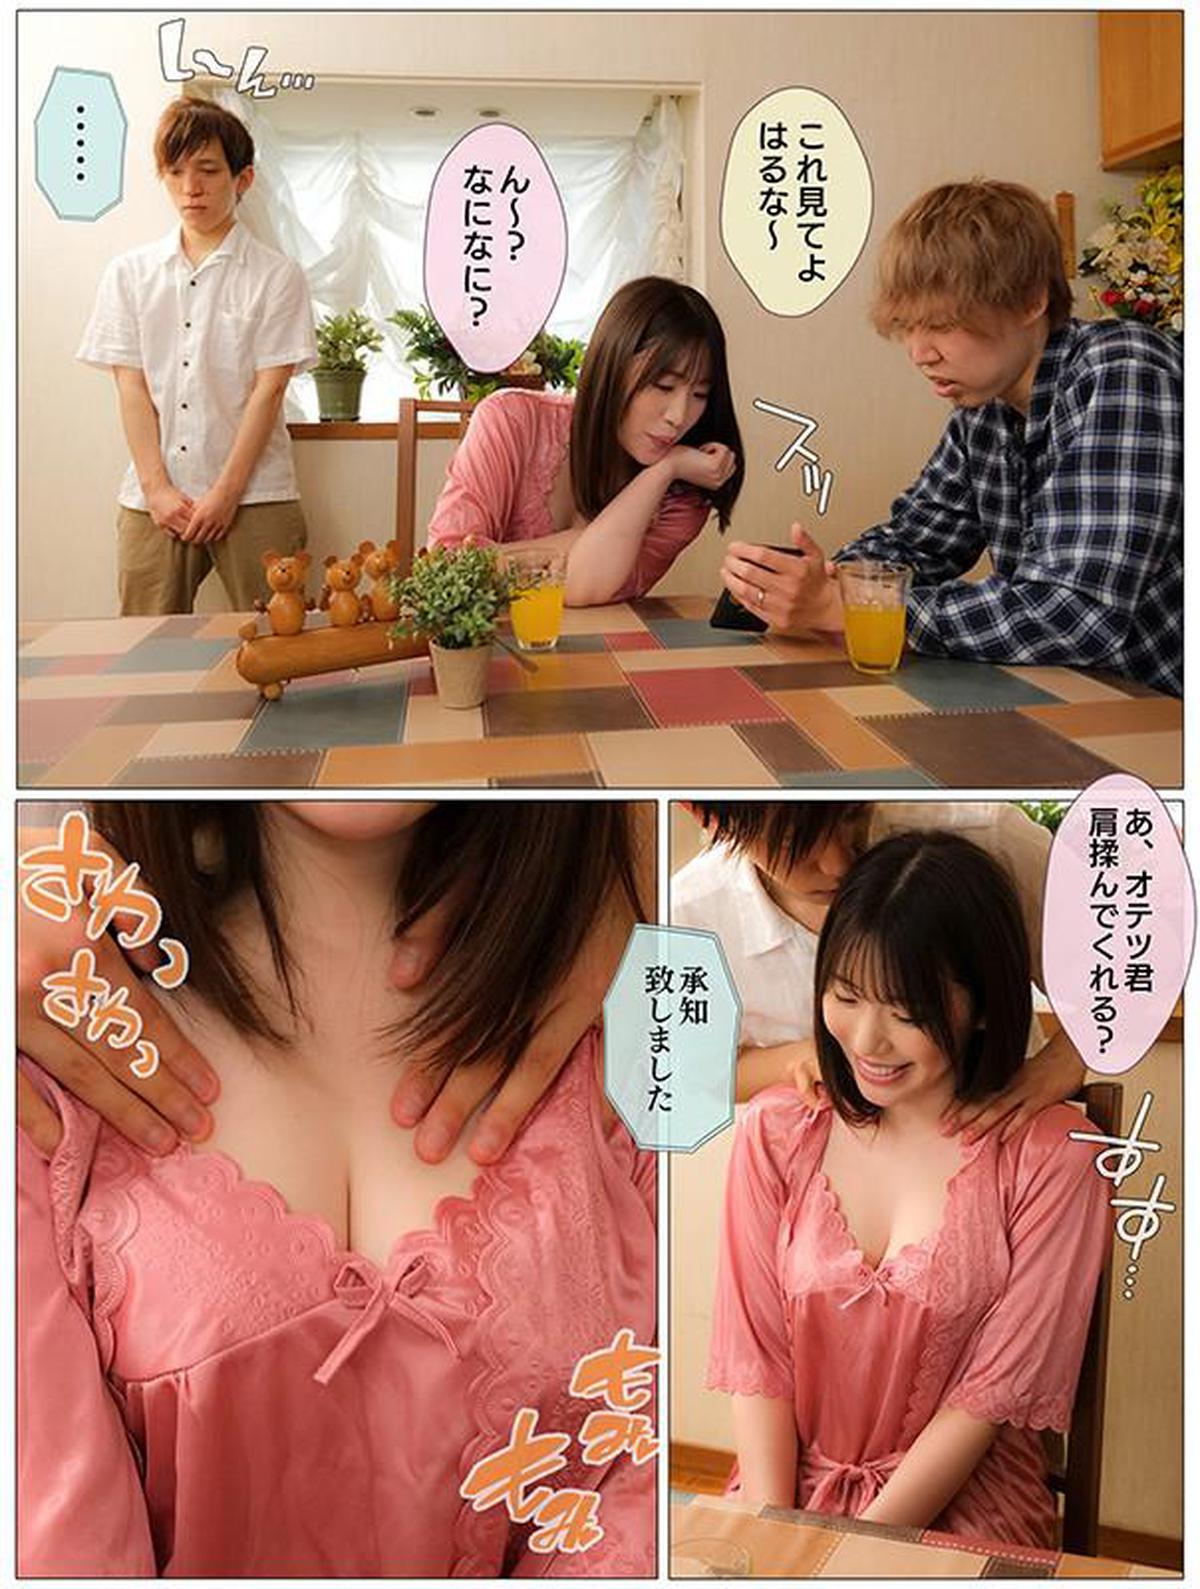 6000Kbps FHD MRSS-095 The story of my wife being robbed by AI Haruna Kawakita